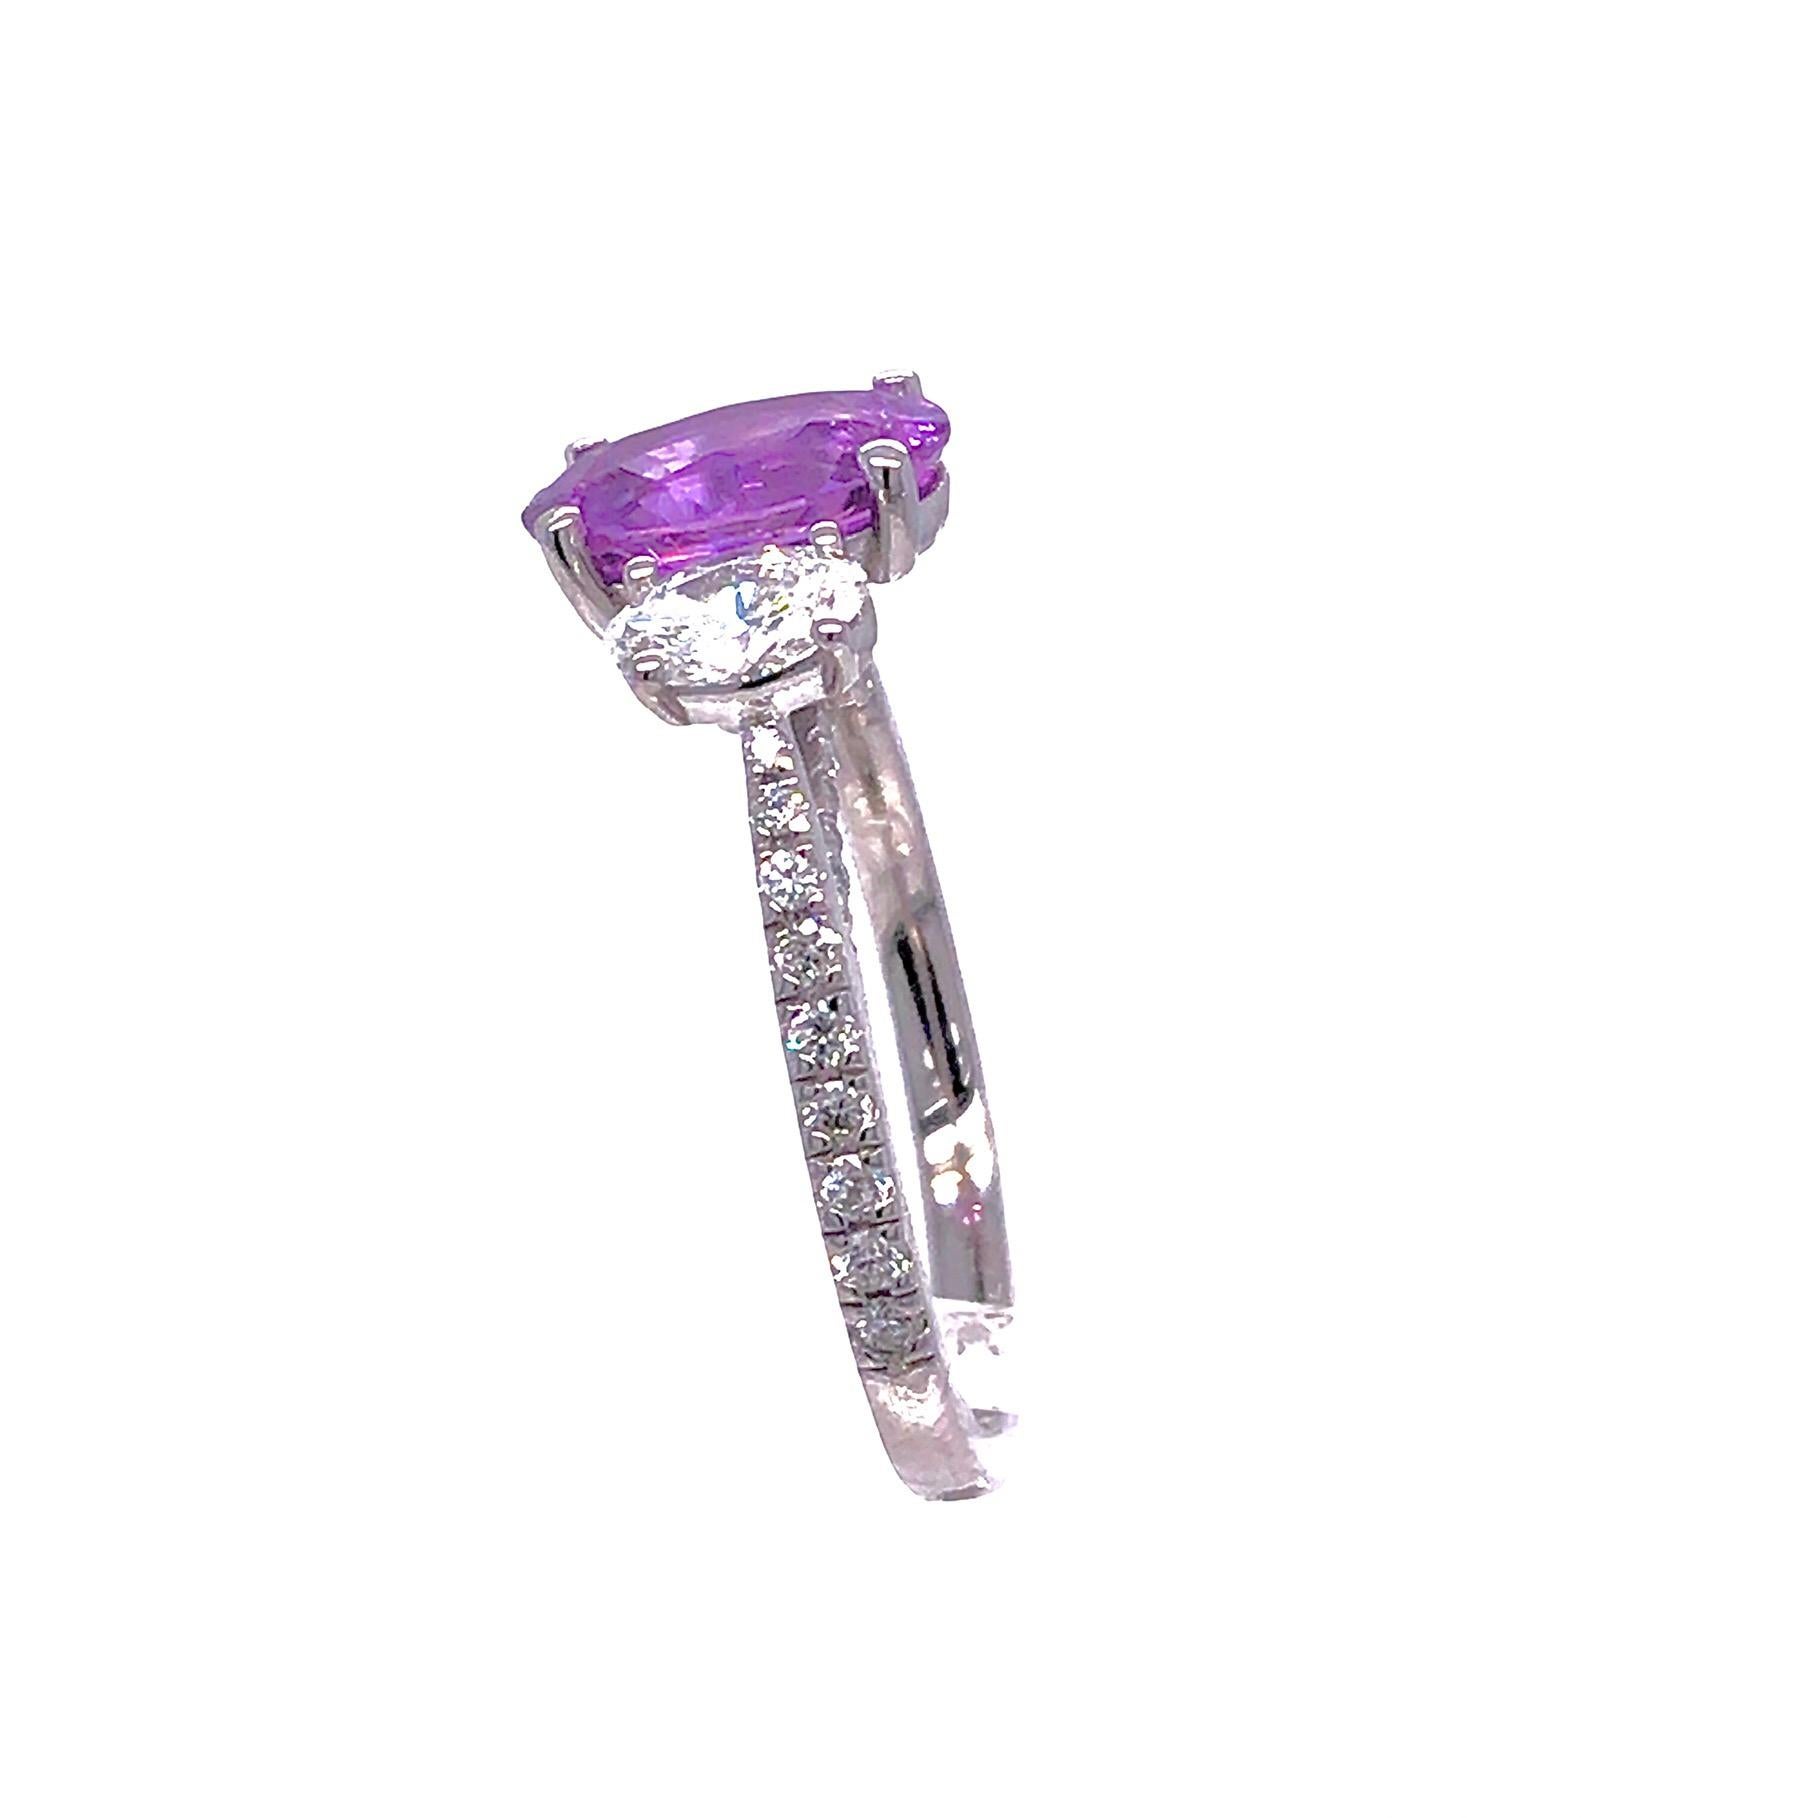 This ring has a center 2.53 carat Pink Rose sapphire, flanked by two oval cut diamonds at its face.
Additional diamonds decorate the side shank, as well as a bridge visible in the side view of the ring.
The total diamond weight is 1.02 carats.
Set